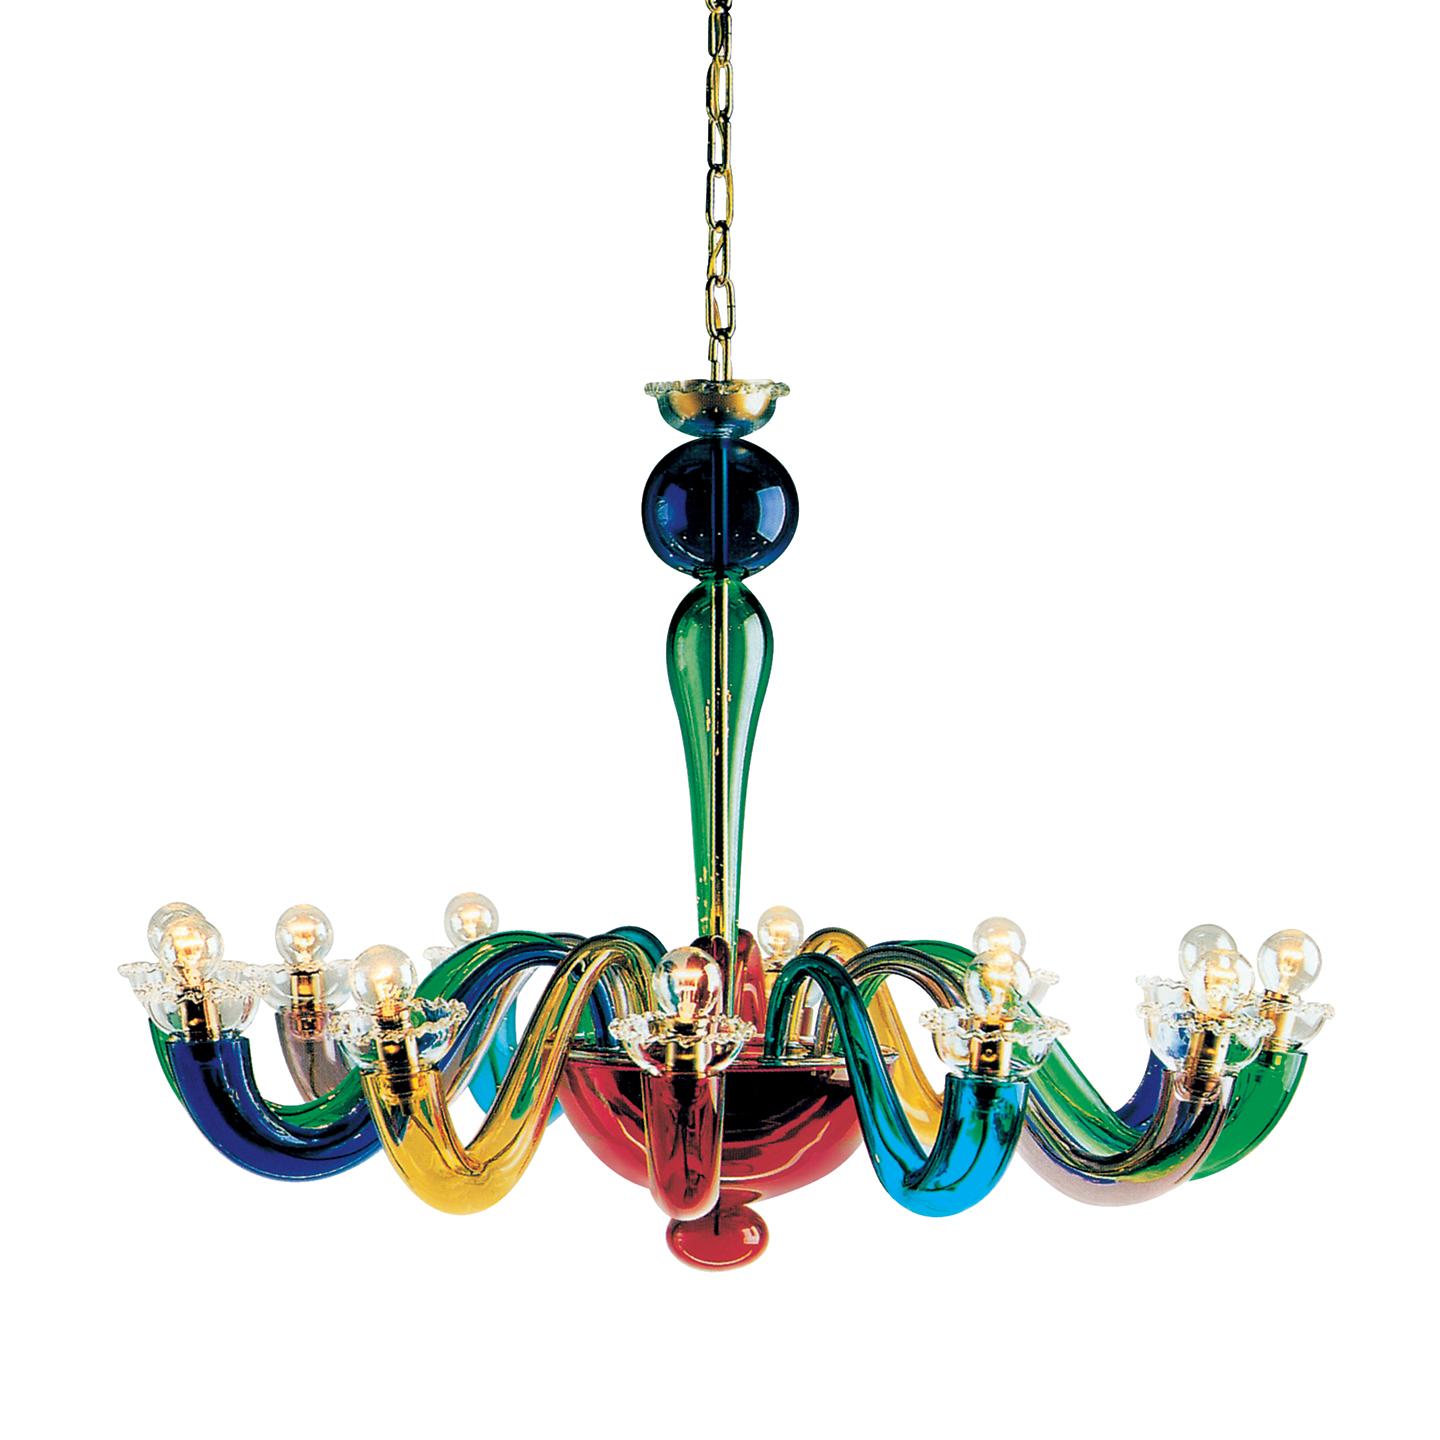 Leucos Serenisima L 12 Chandelier in Multi-Color and Gold by Archivio Storico For Sale